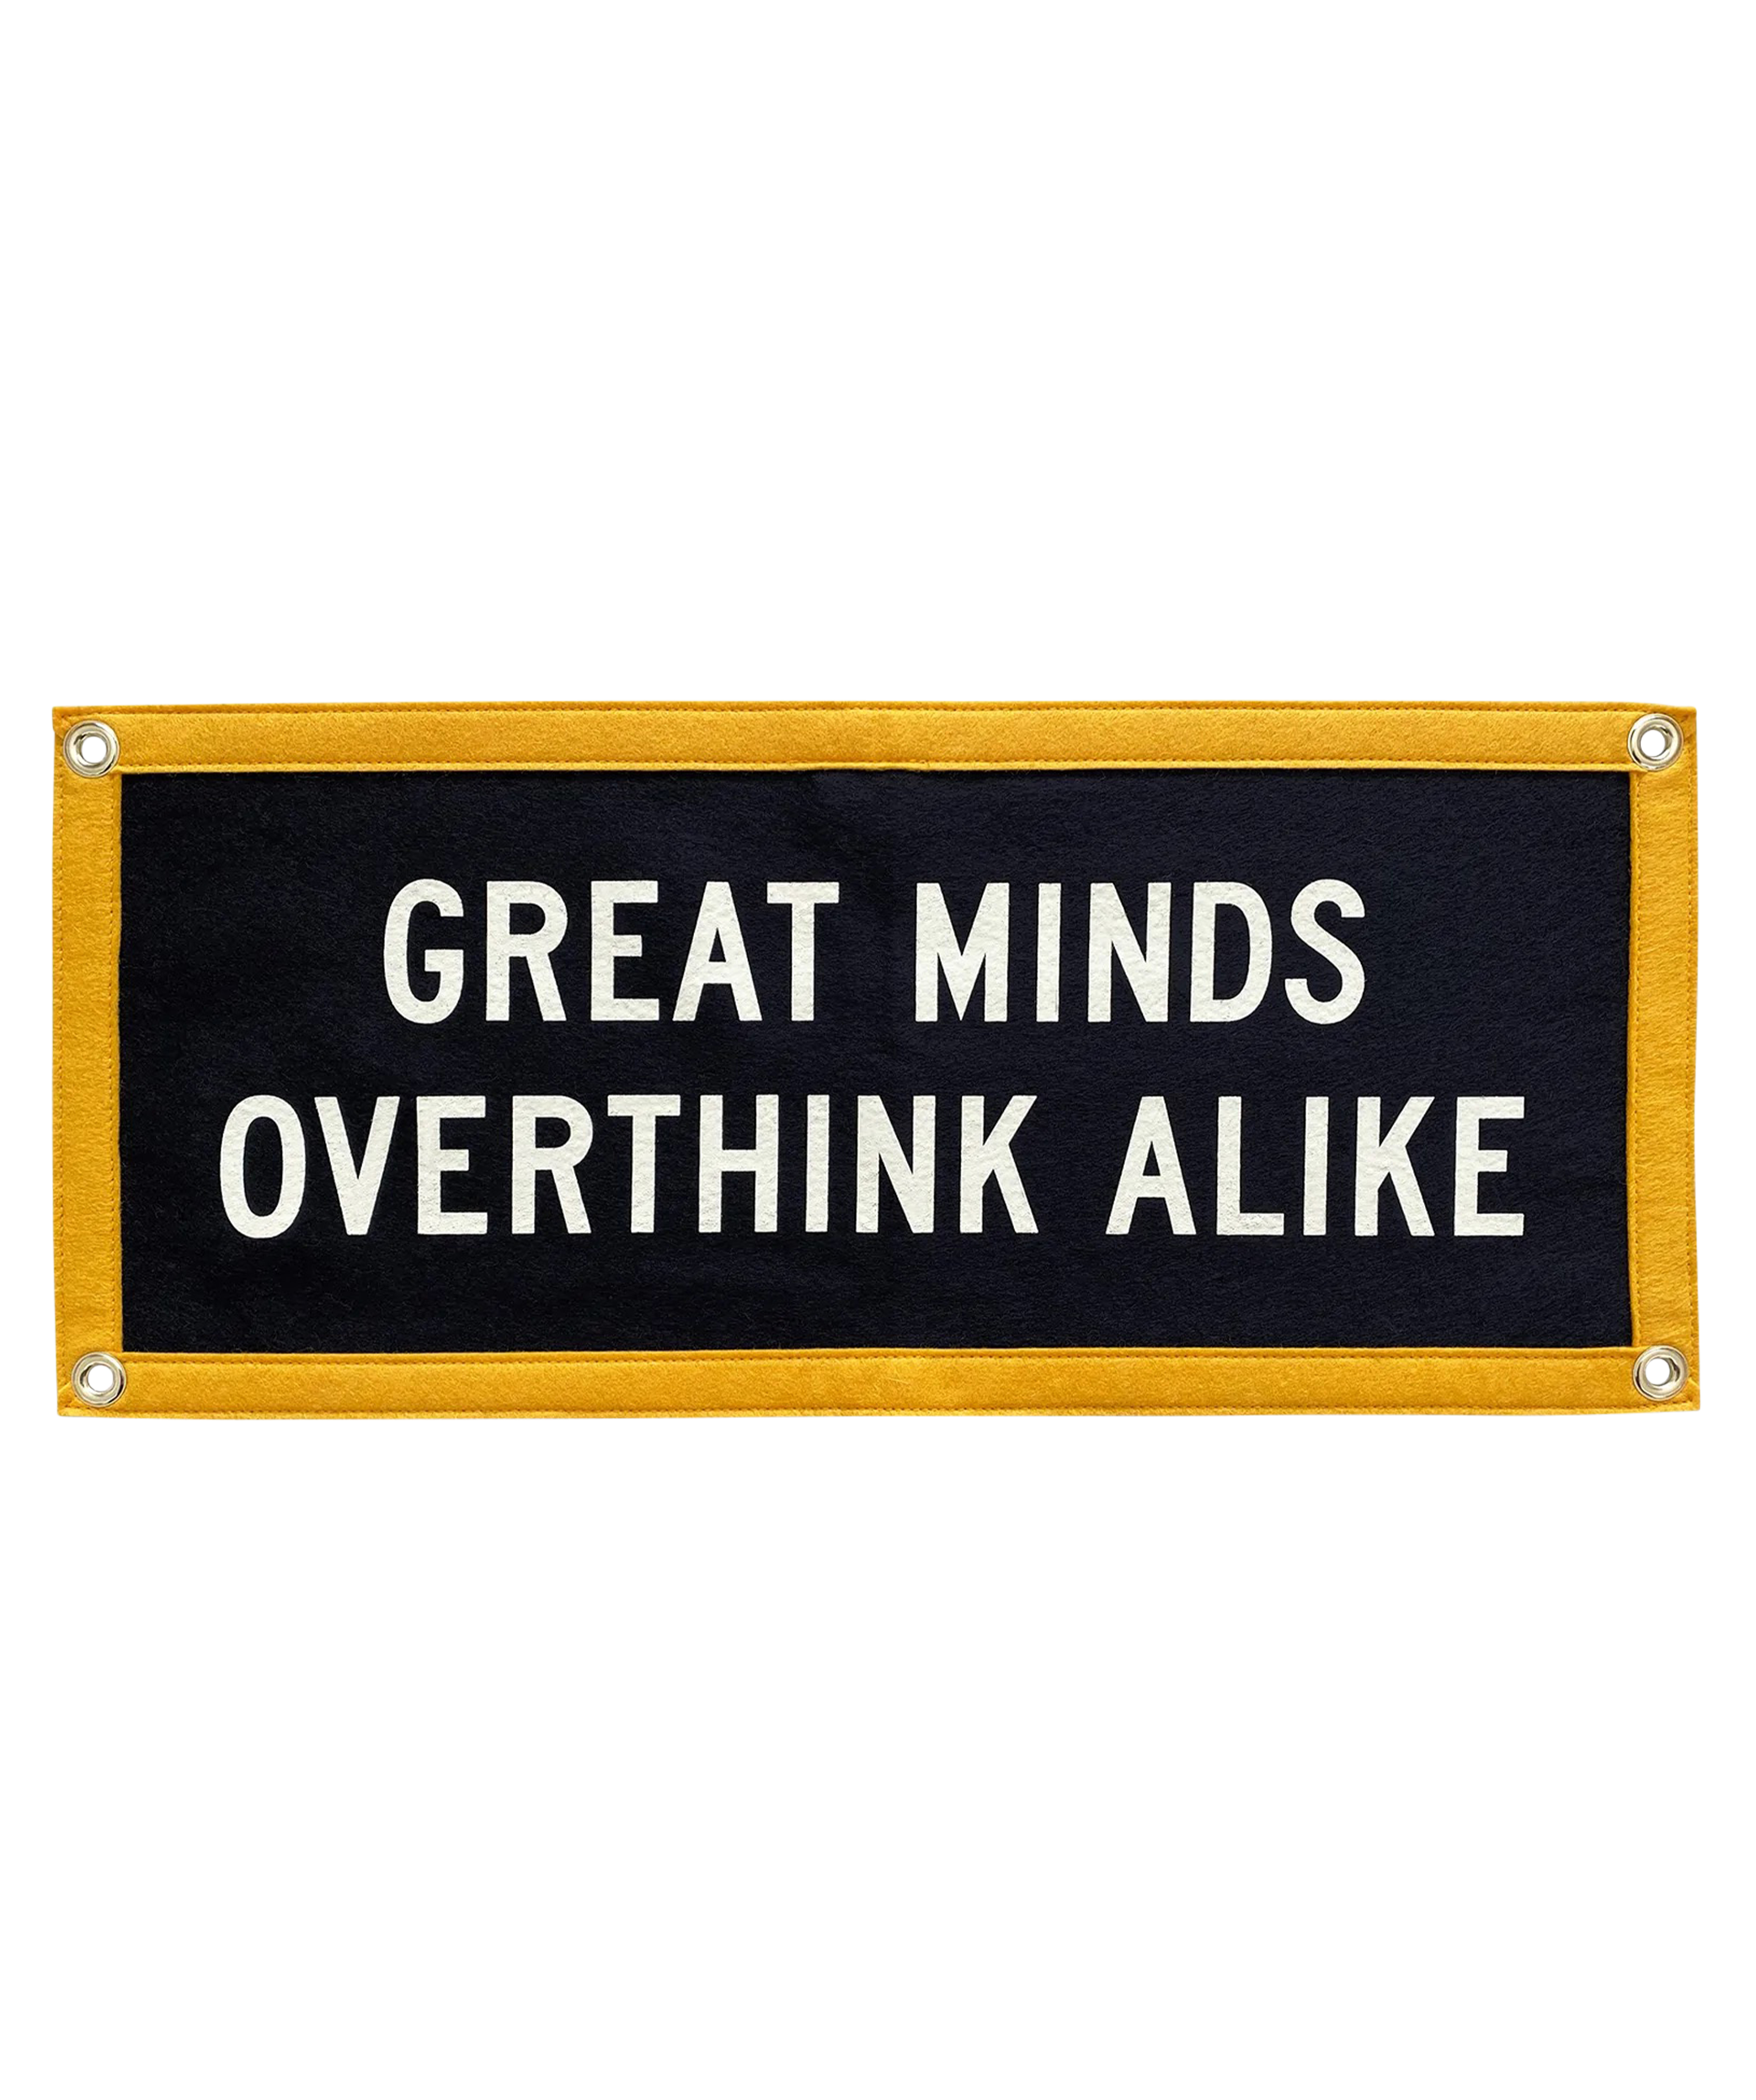 Great Minds Overthink Alike Camp Flag Holy Smokes x Oxford Pennant